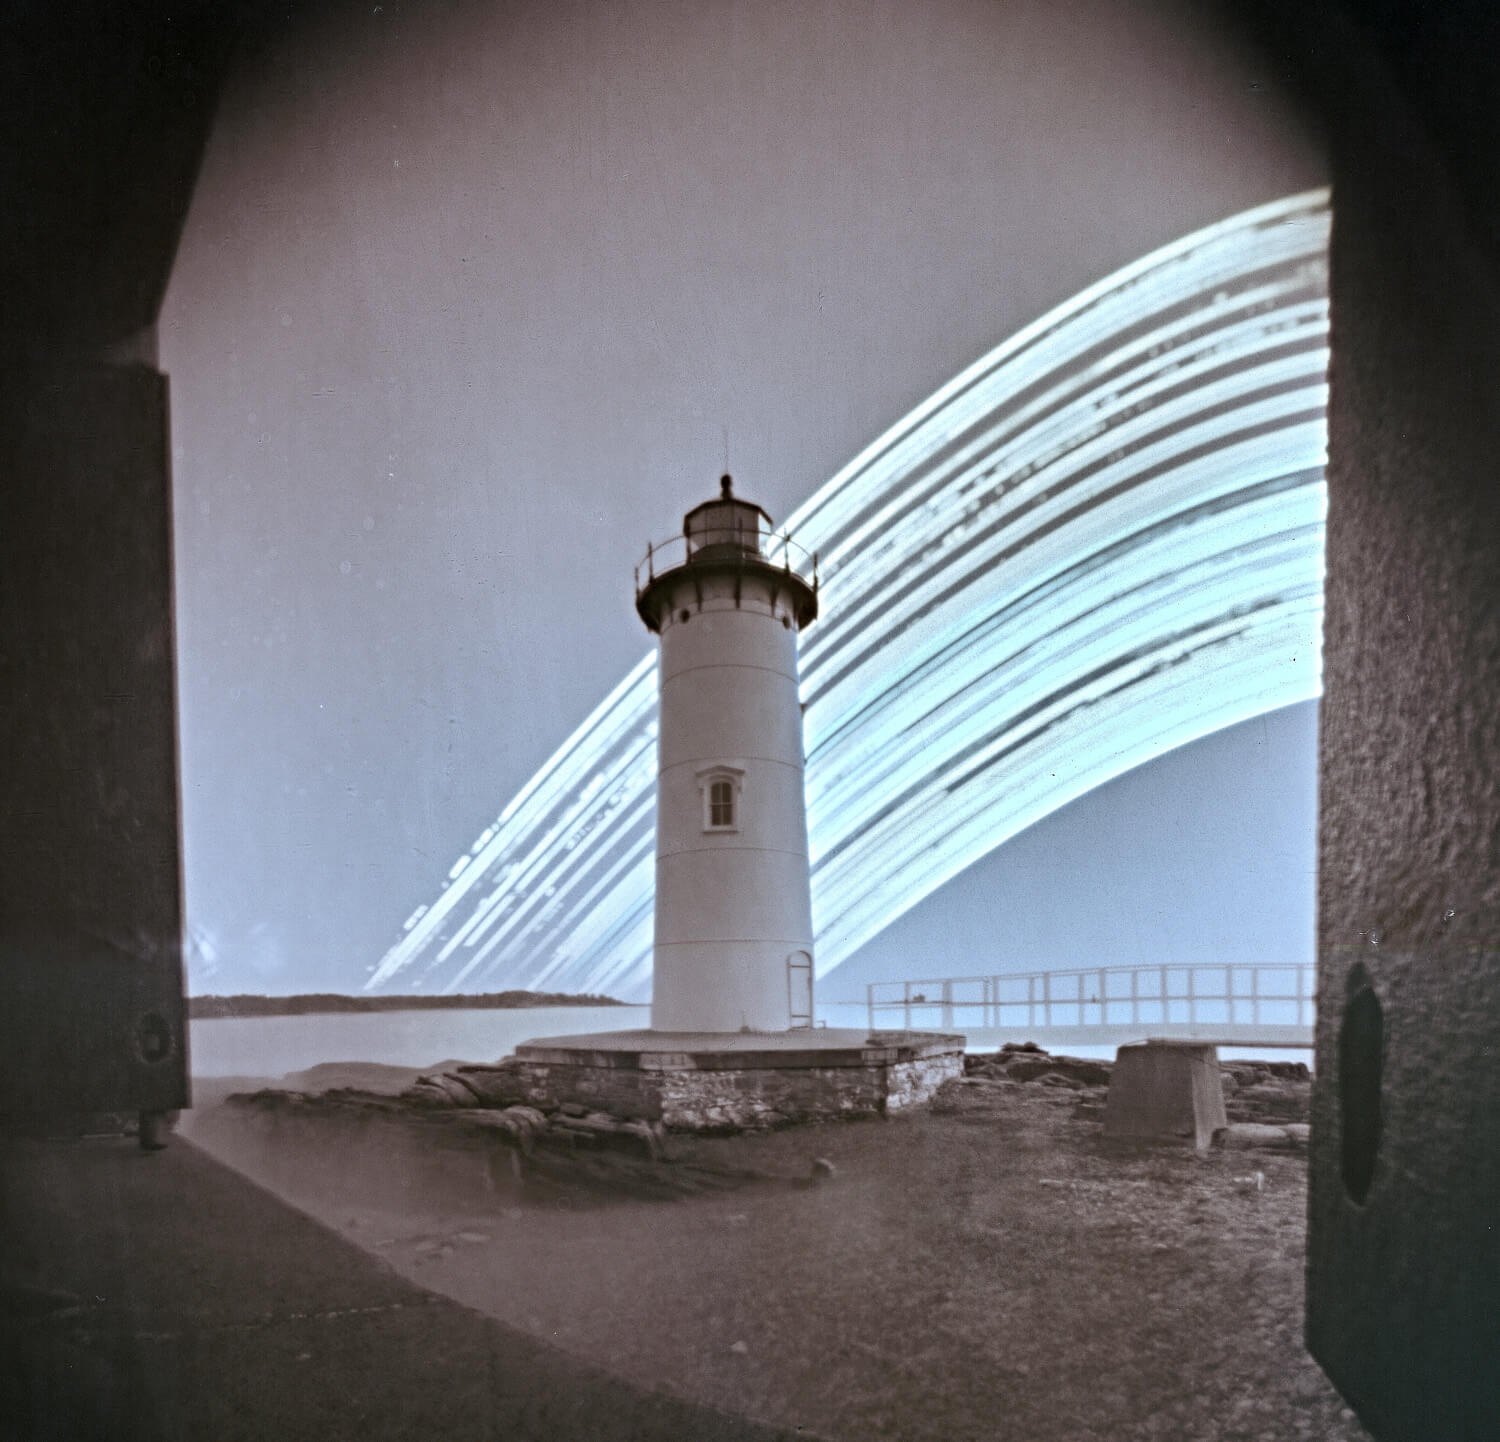 Portsmouth Harbor Light, Portsmouth, NH. The destruction of the footbridge to the light in December 2022 lends a ghostly element to this image, and tells the story of crashing waves, freezing winds, and a destructive sea.